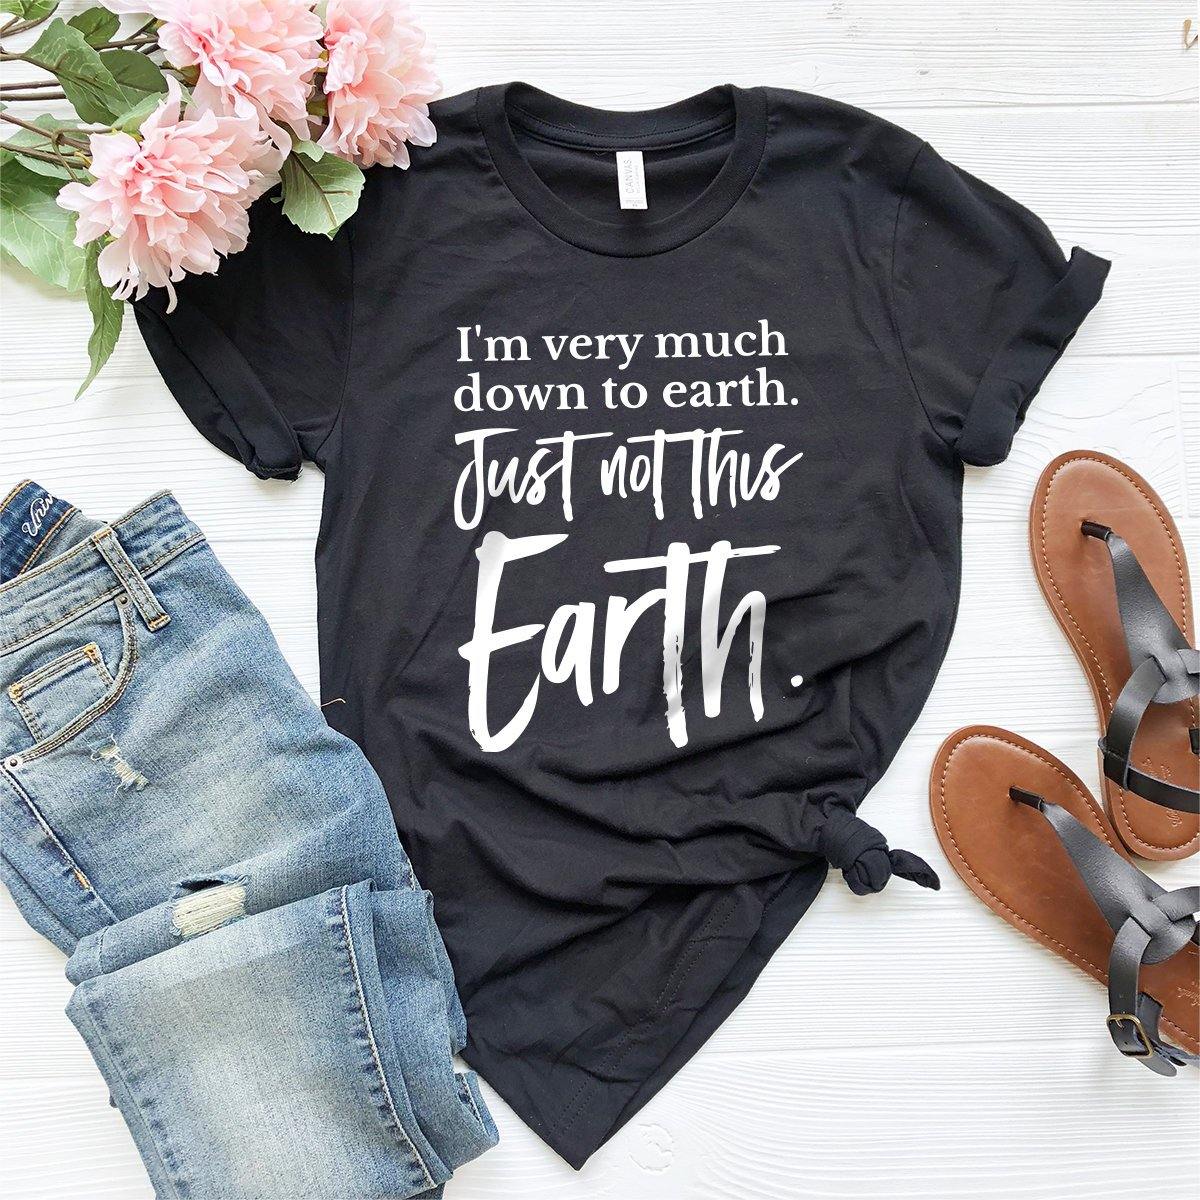 Karl Lagerfeld Quote T-Shirt, Karl Lagerfeld Fan Shirt, Inspirational Saying Shirt, I'm Very Much Down To Earth Just Not This Earth Shirt - Fastdeliverytees.com